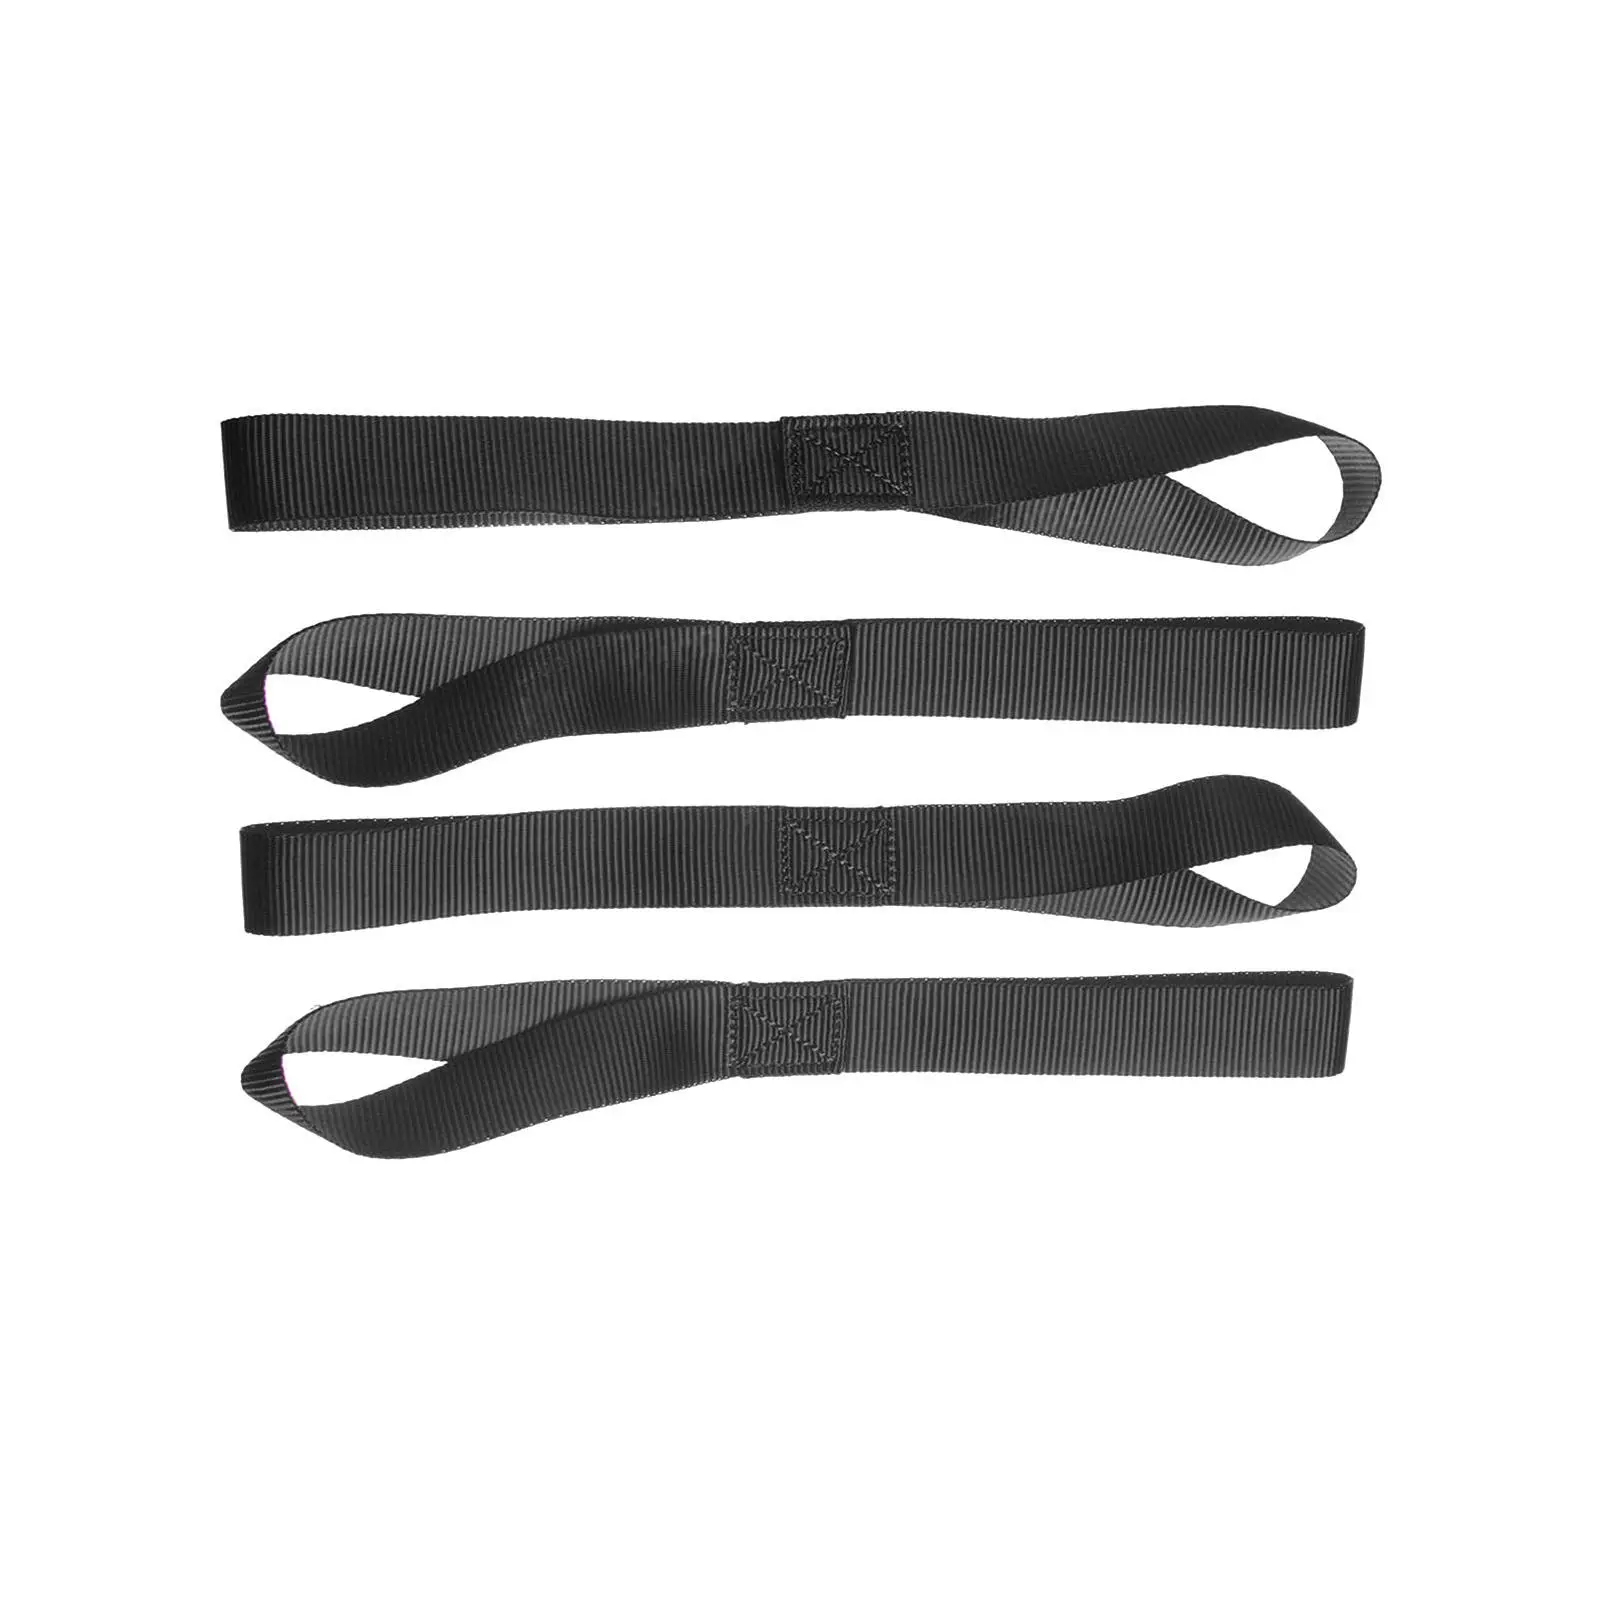 5x Soft Loop High Strength Vehicle Moving ATV UTV Lawn Equipment Tie-down Loops for Motorcycle Bikes Owing Cargo Tie Down Straps